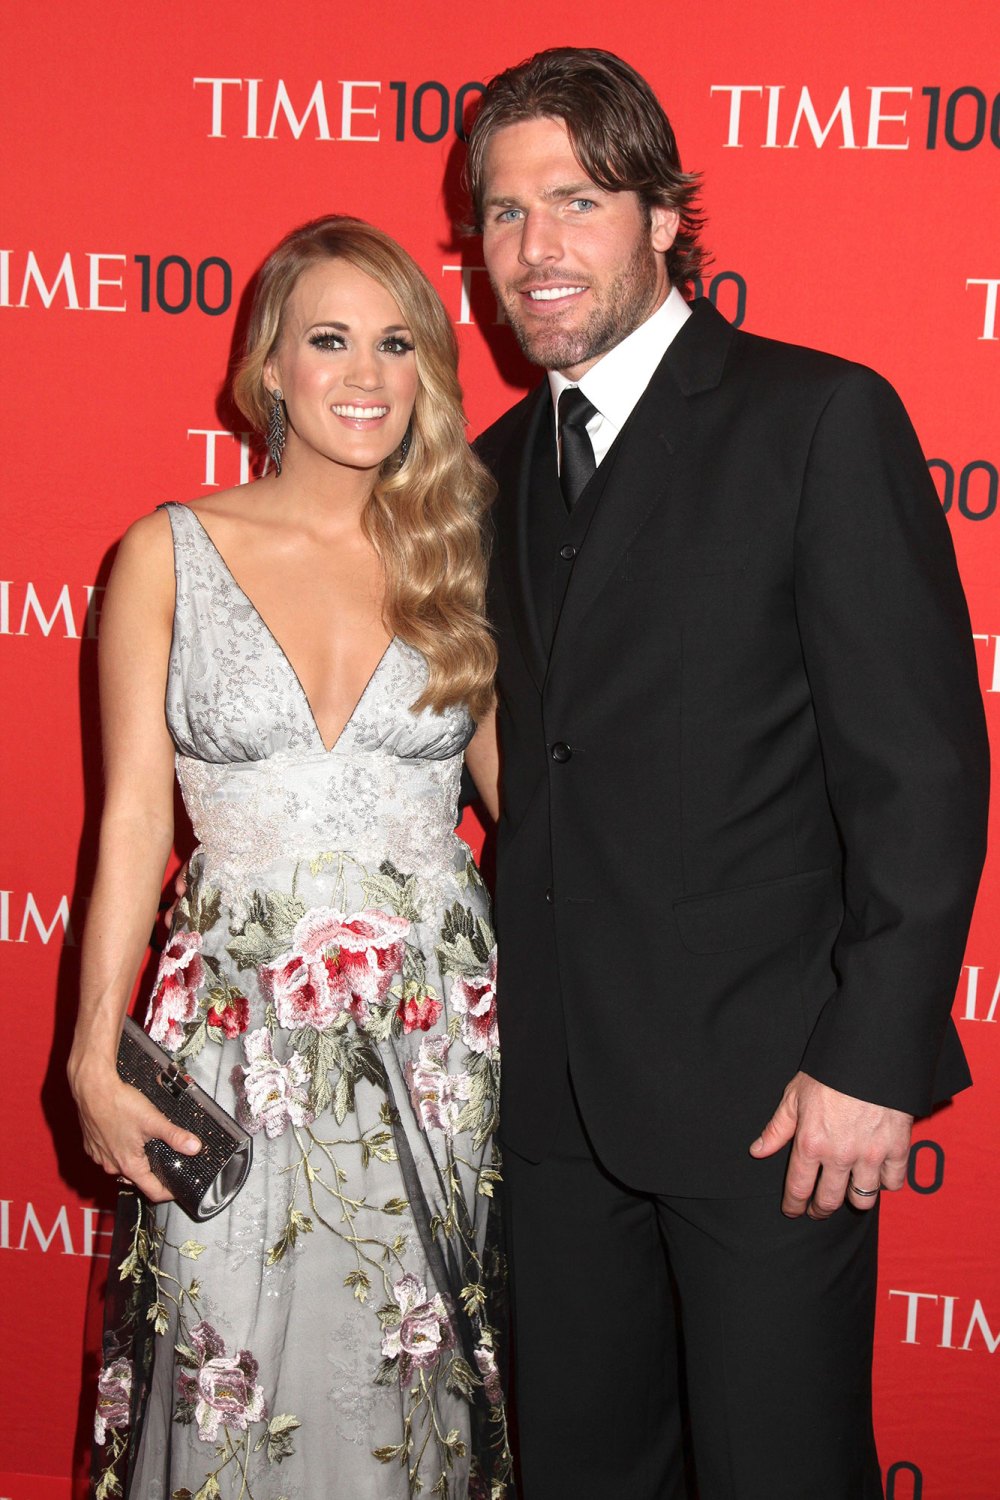 Carrie Underwood is Pregnant, Expecting First Child With Husband Mike Fisher!